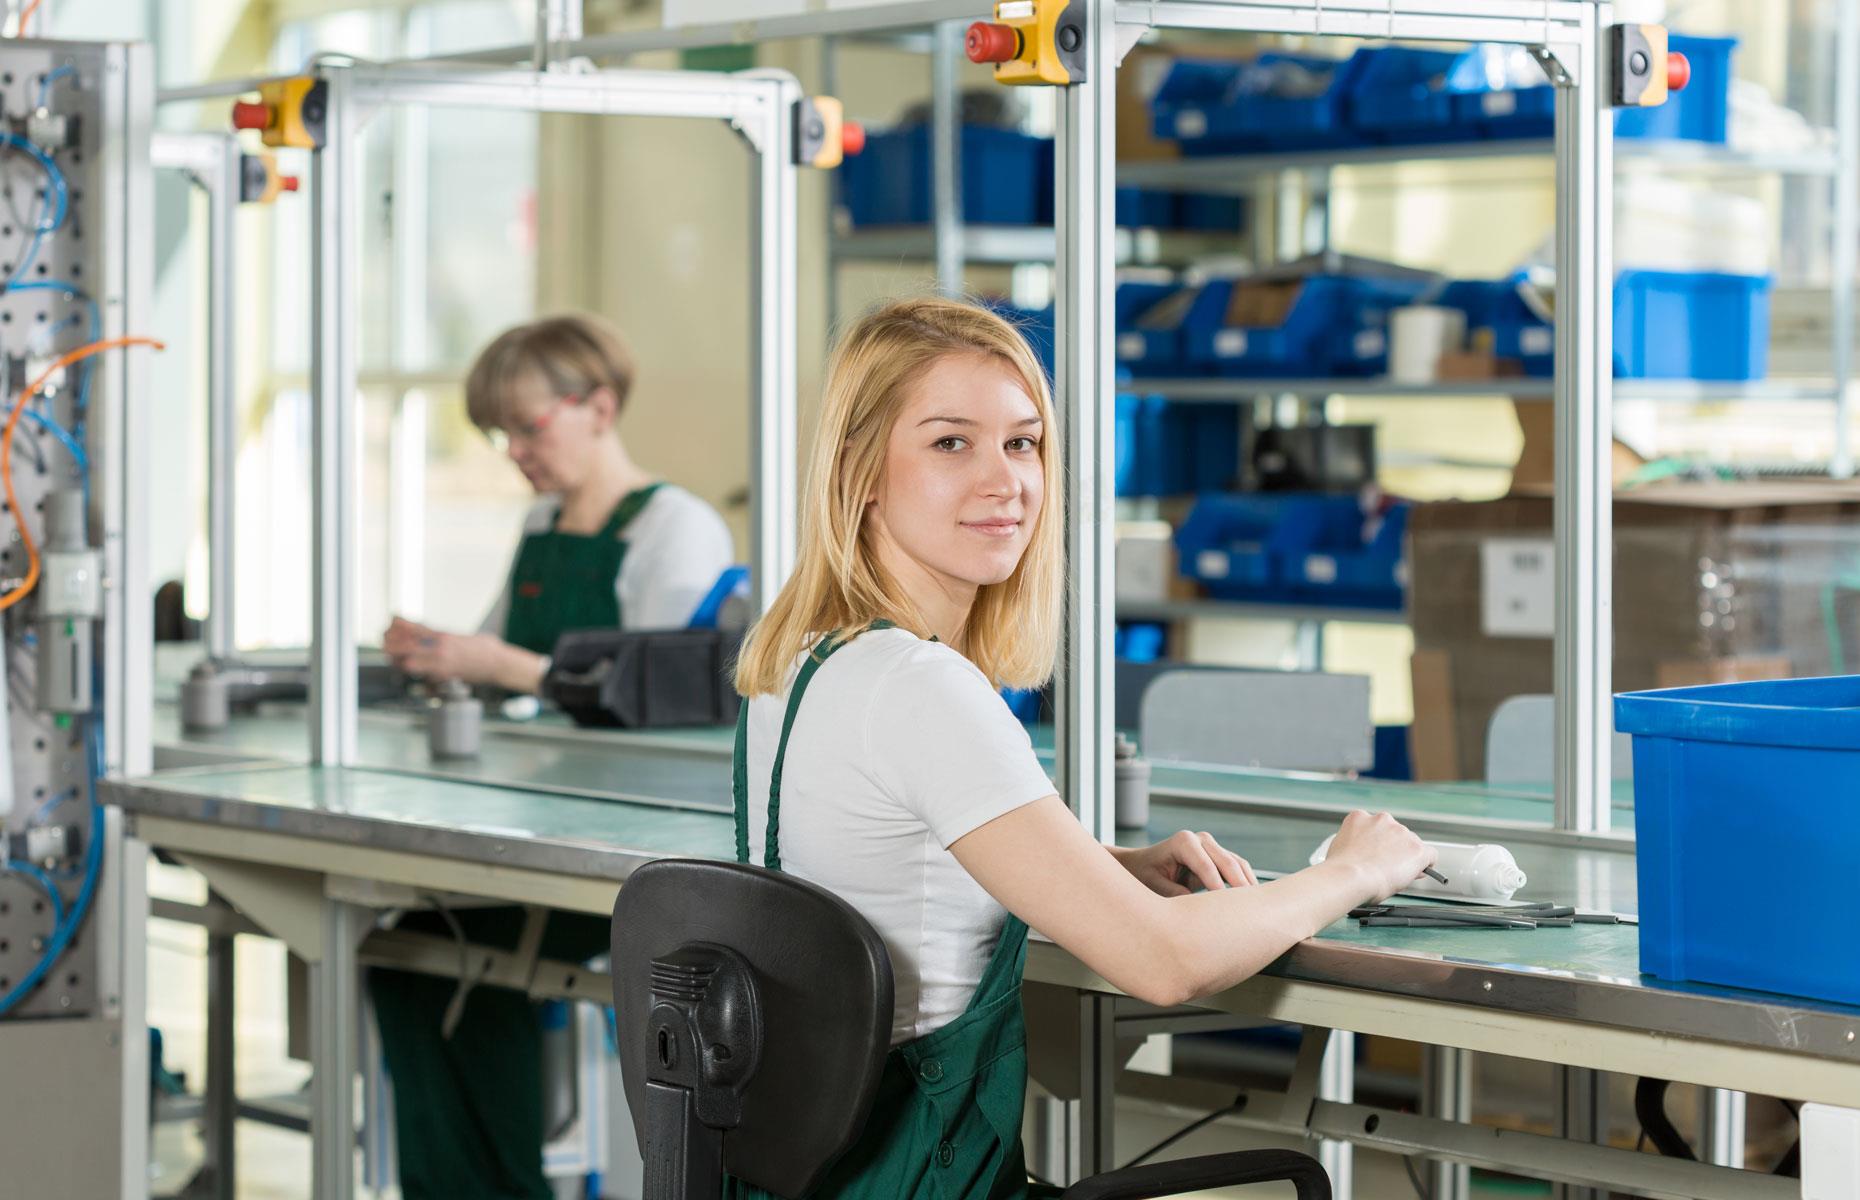 Highest-paying country for skilled factory workers: Norway – $168,000 (£129k) average salary